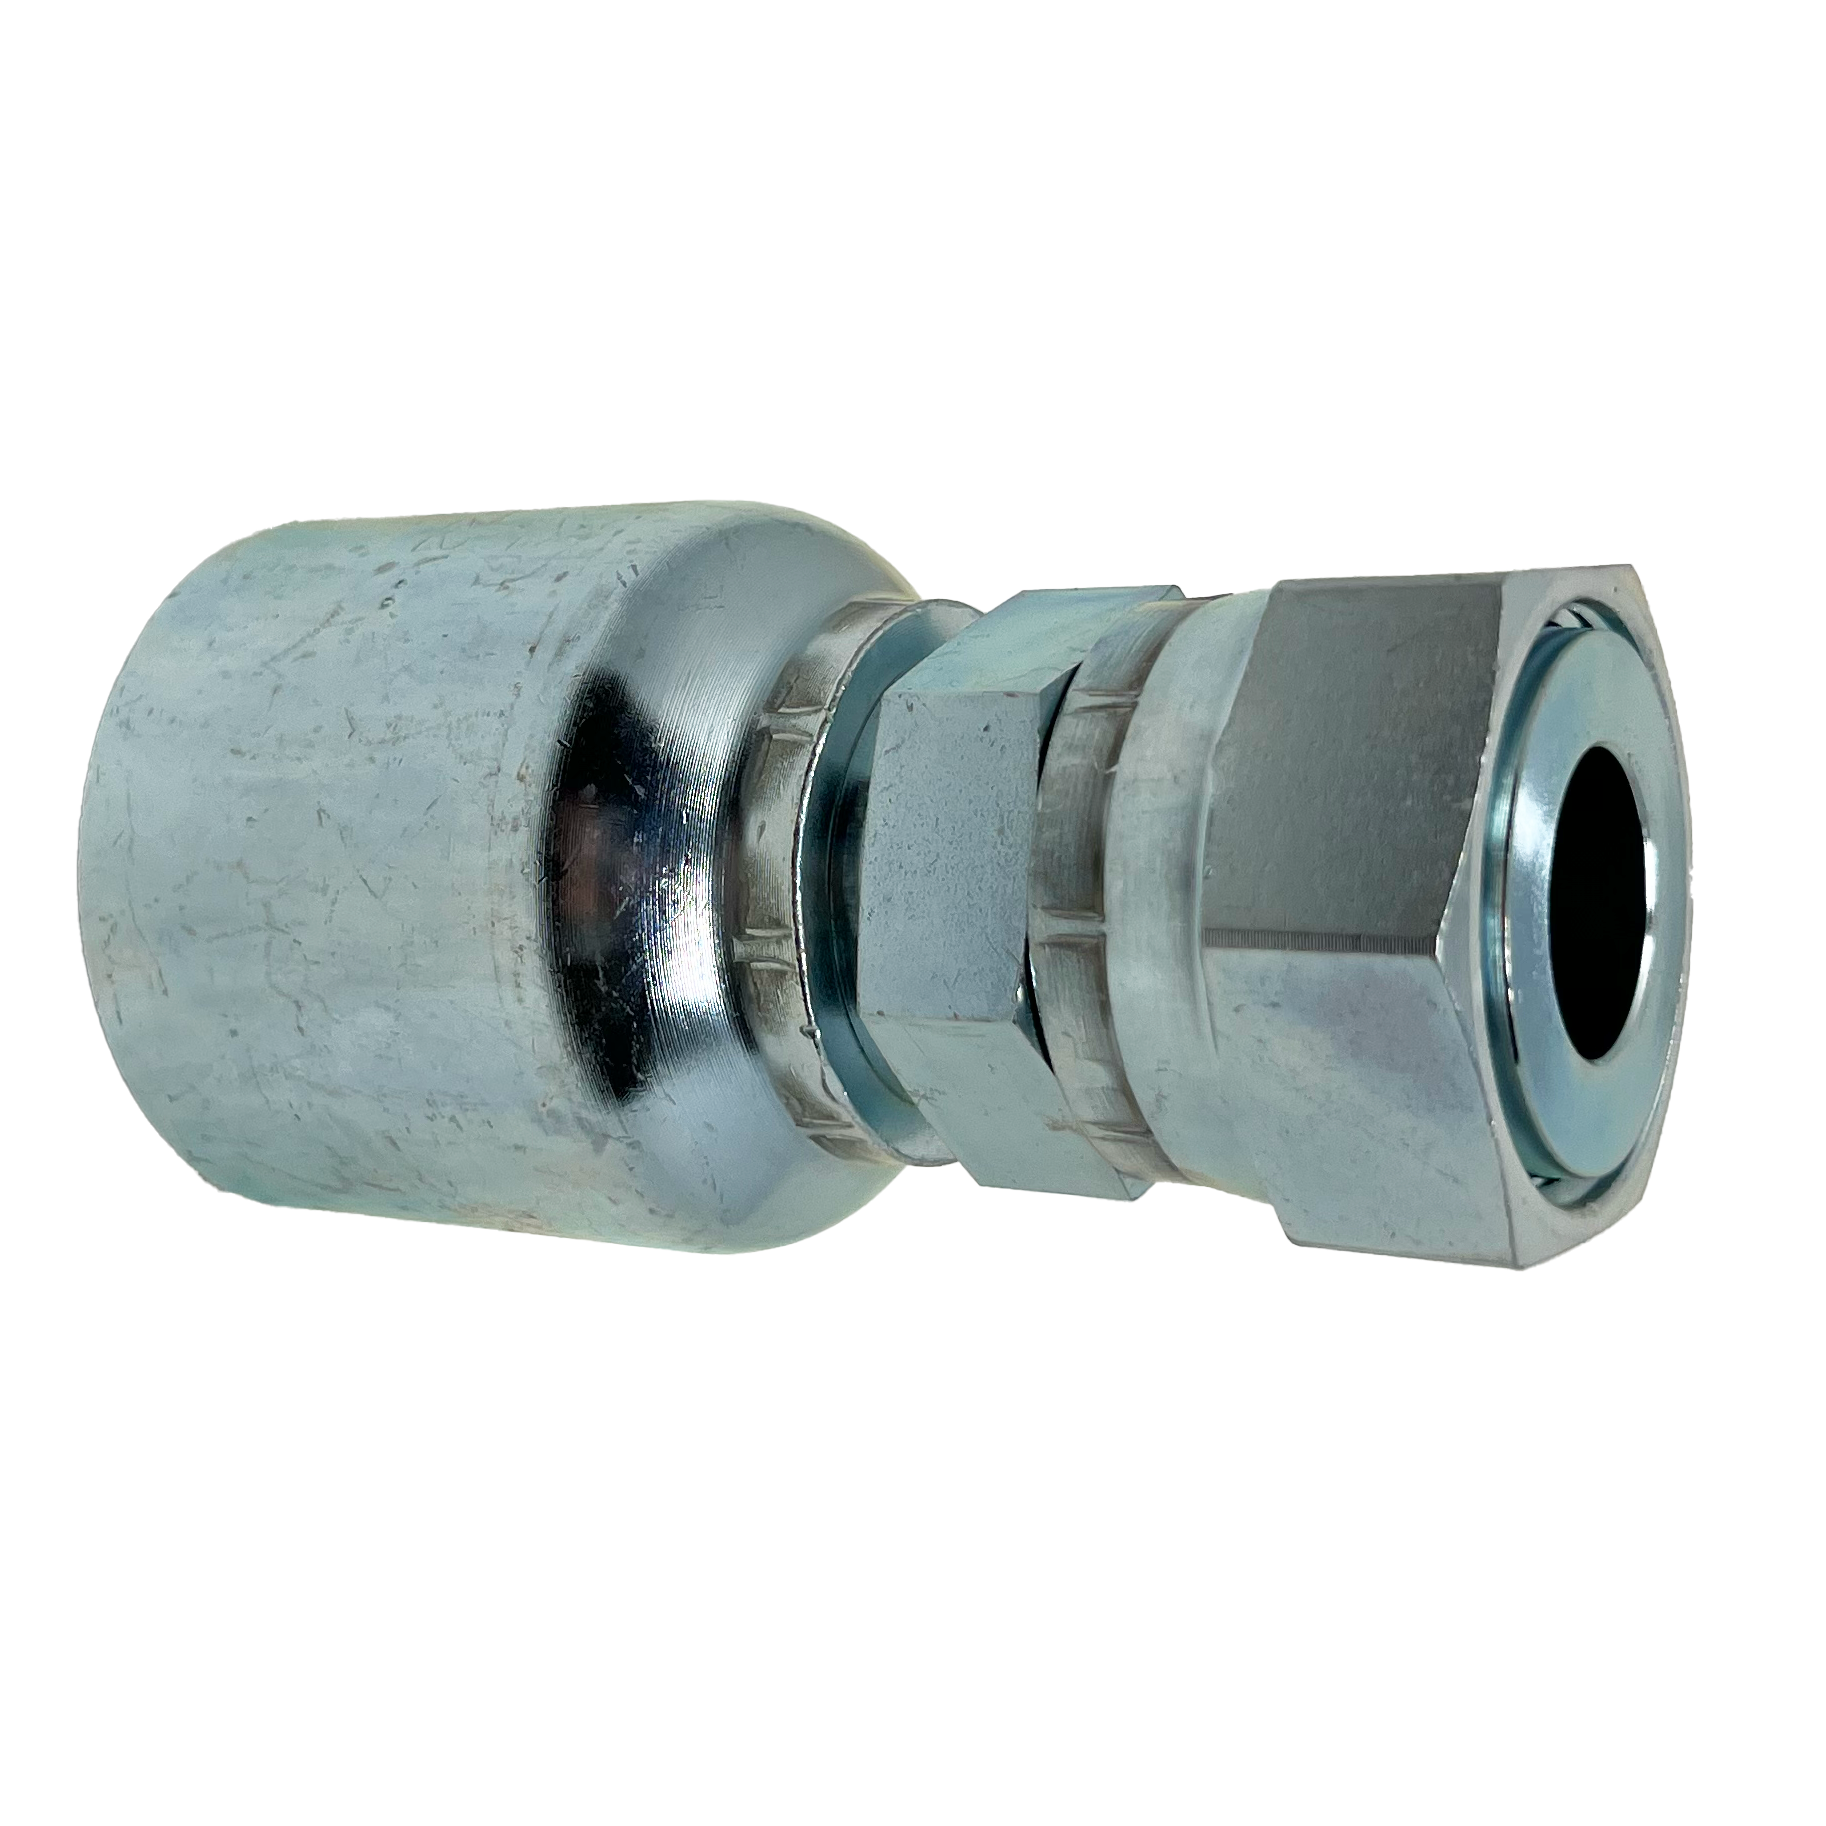 B2-OFFX-1616: Continental Hose Fitting, 1" Hose ID x 1-7/16-12 Female ORFS, Straight Swivel Connection